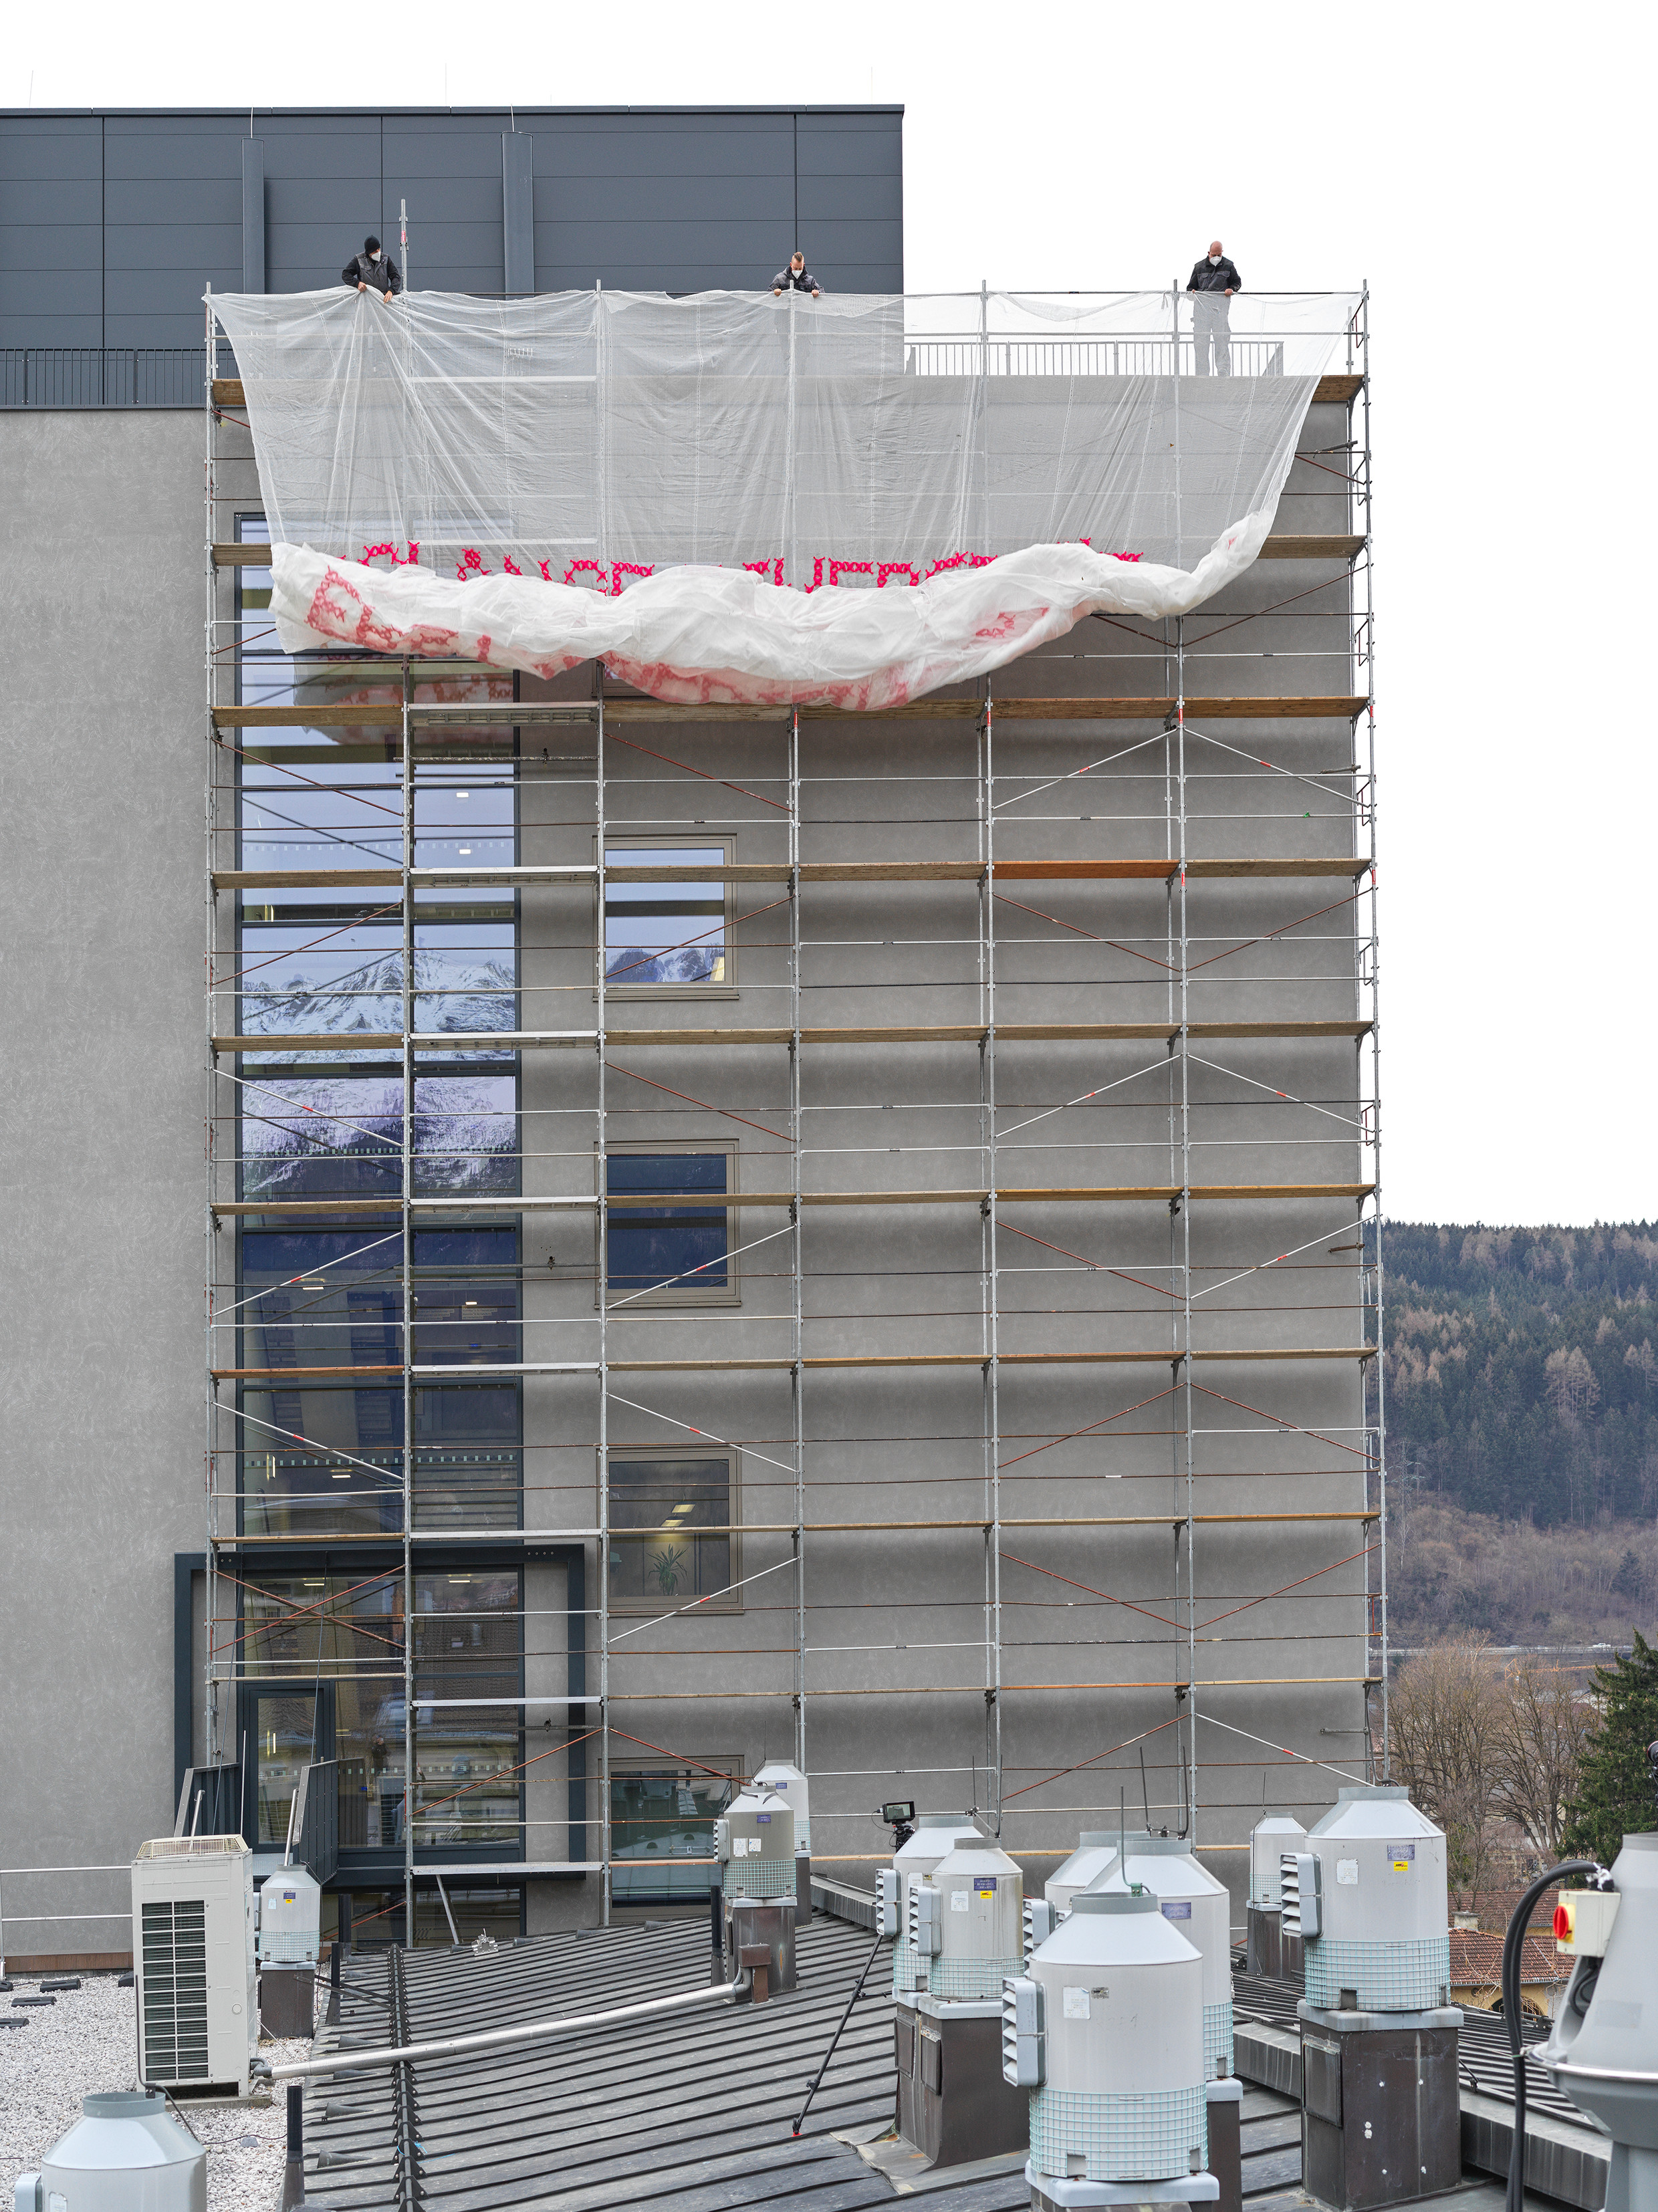 White mesh scrim is unfurled from the top of a building to cover several floors of scaffolding.